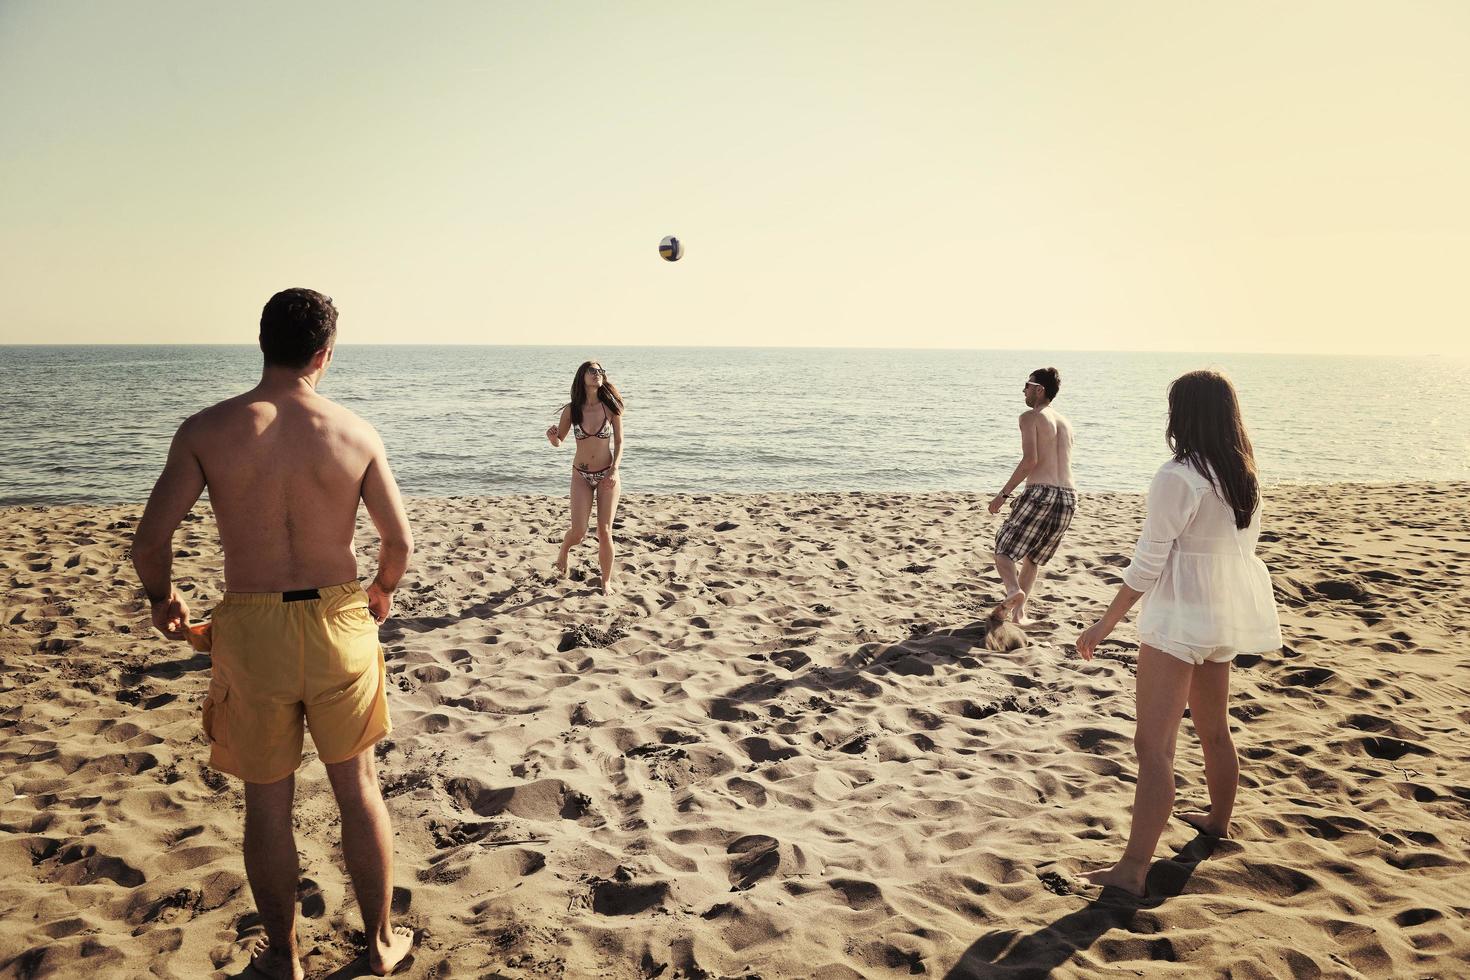 young people group have fun and play beach volleyball photo